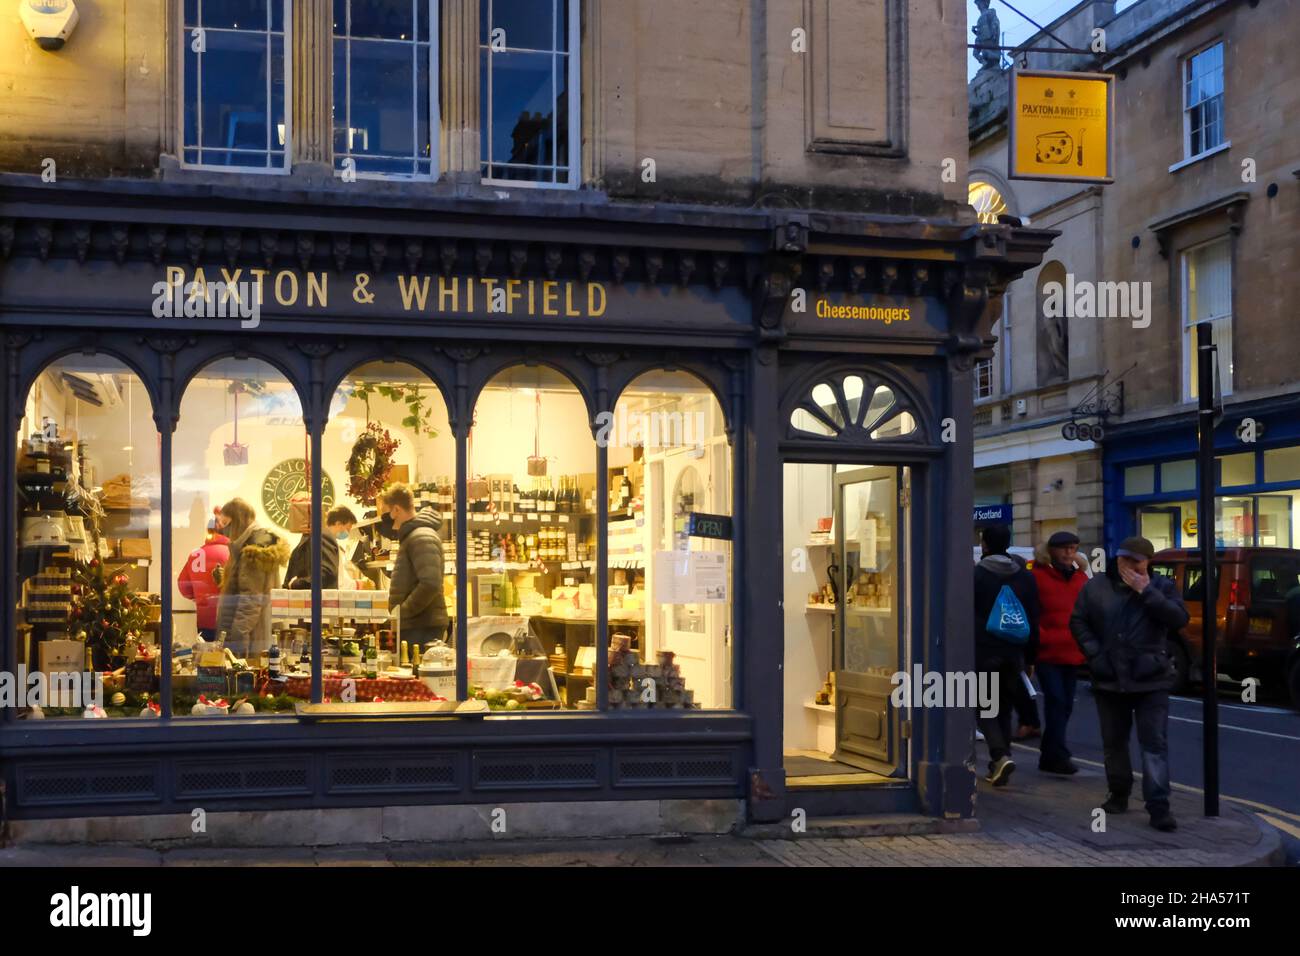 Bath, 10th December 2021. People do their Pre-Christmas shopping in Bath city centre as concerns over the Omicron Covid-19 variant rise. The Paxton and Whitfield cheese shop. Some people are wearing masks outside and some are not. Credit: JMF News/Alamy Live News Stock Photo